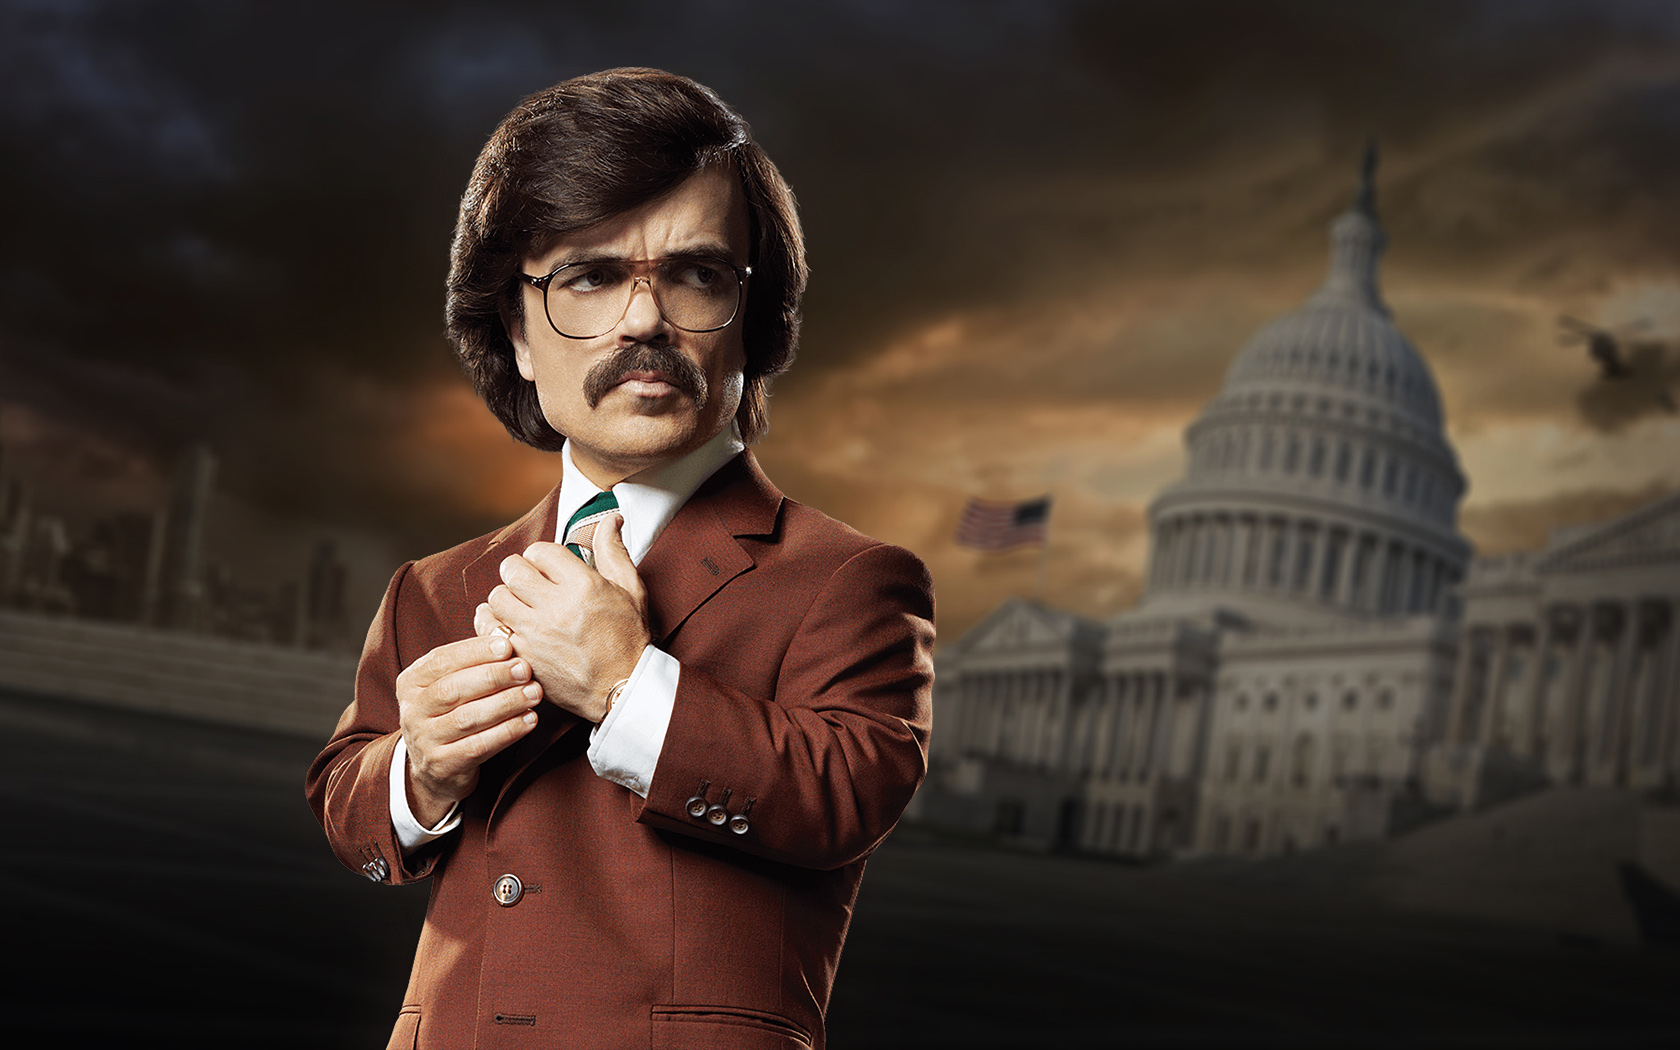 Bolivar Trask Played By Peter Dinklage Wallpaper and Background